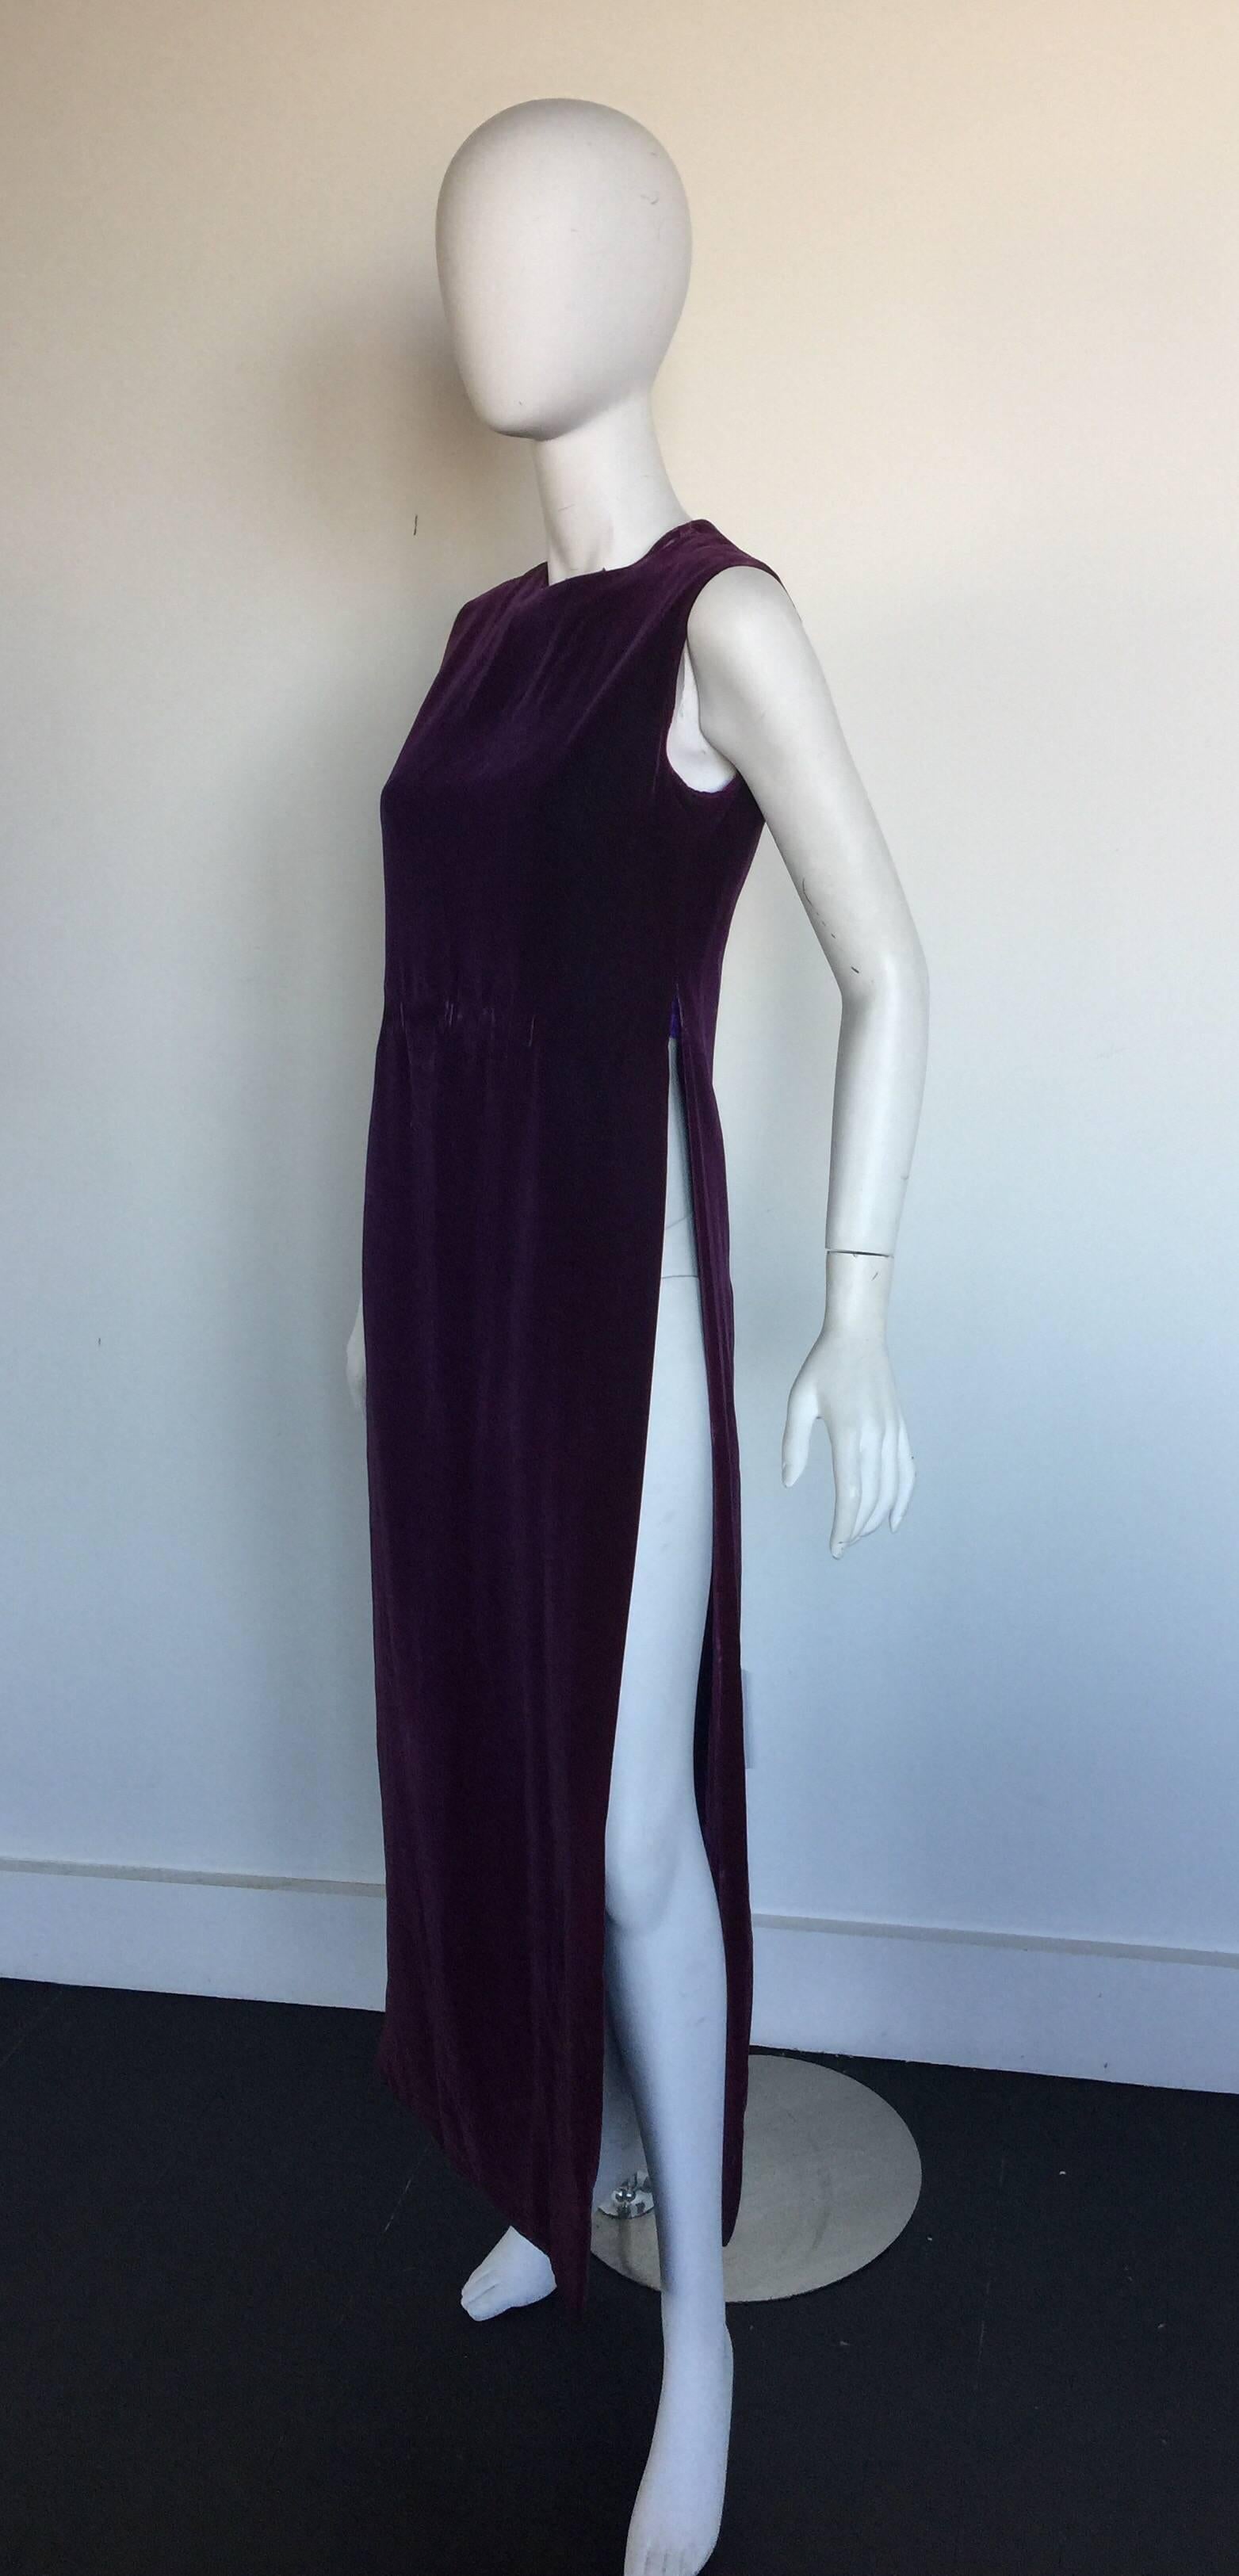 Deep Purple velvet caftan with 38 inch side slit on both sides reaching to just below the bra line.  This Pierre Cardin piece is from the 1960s.  It can be worn over a dress or pants or even small shorts/mini skirt